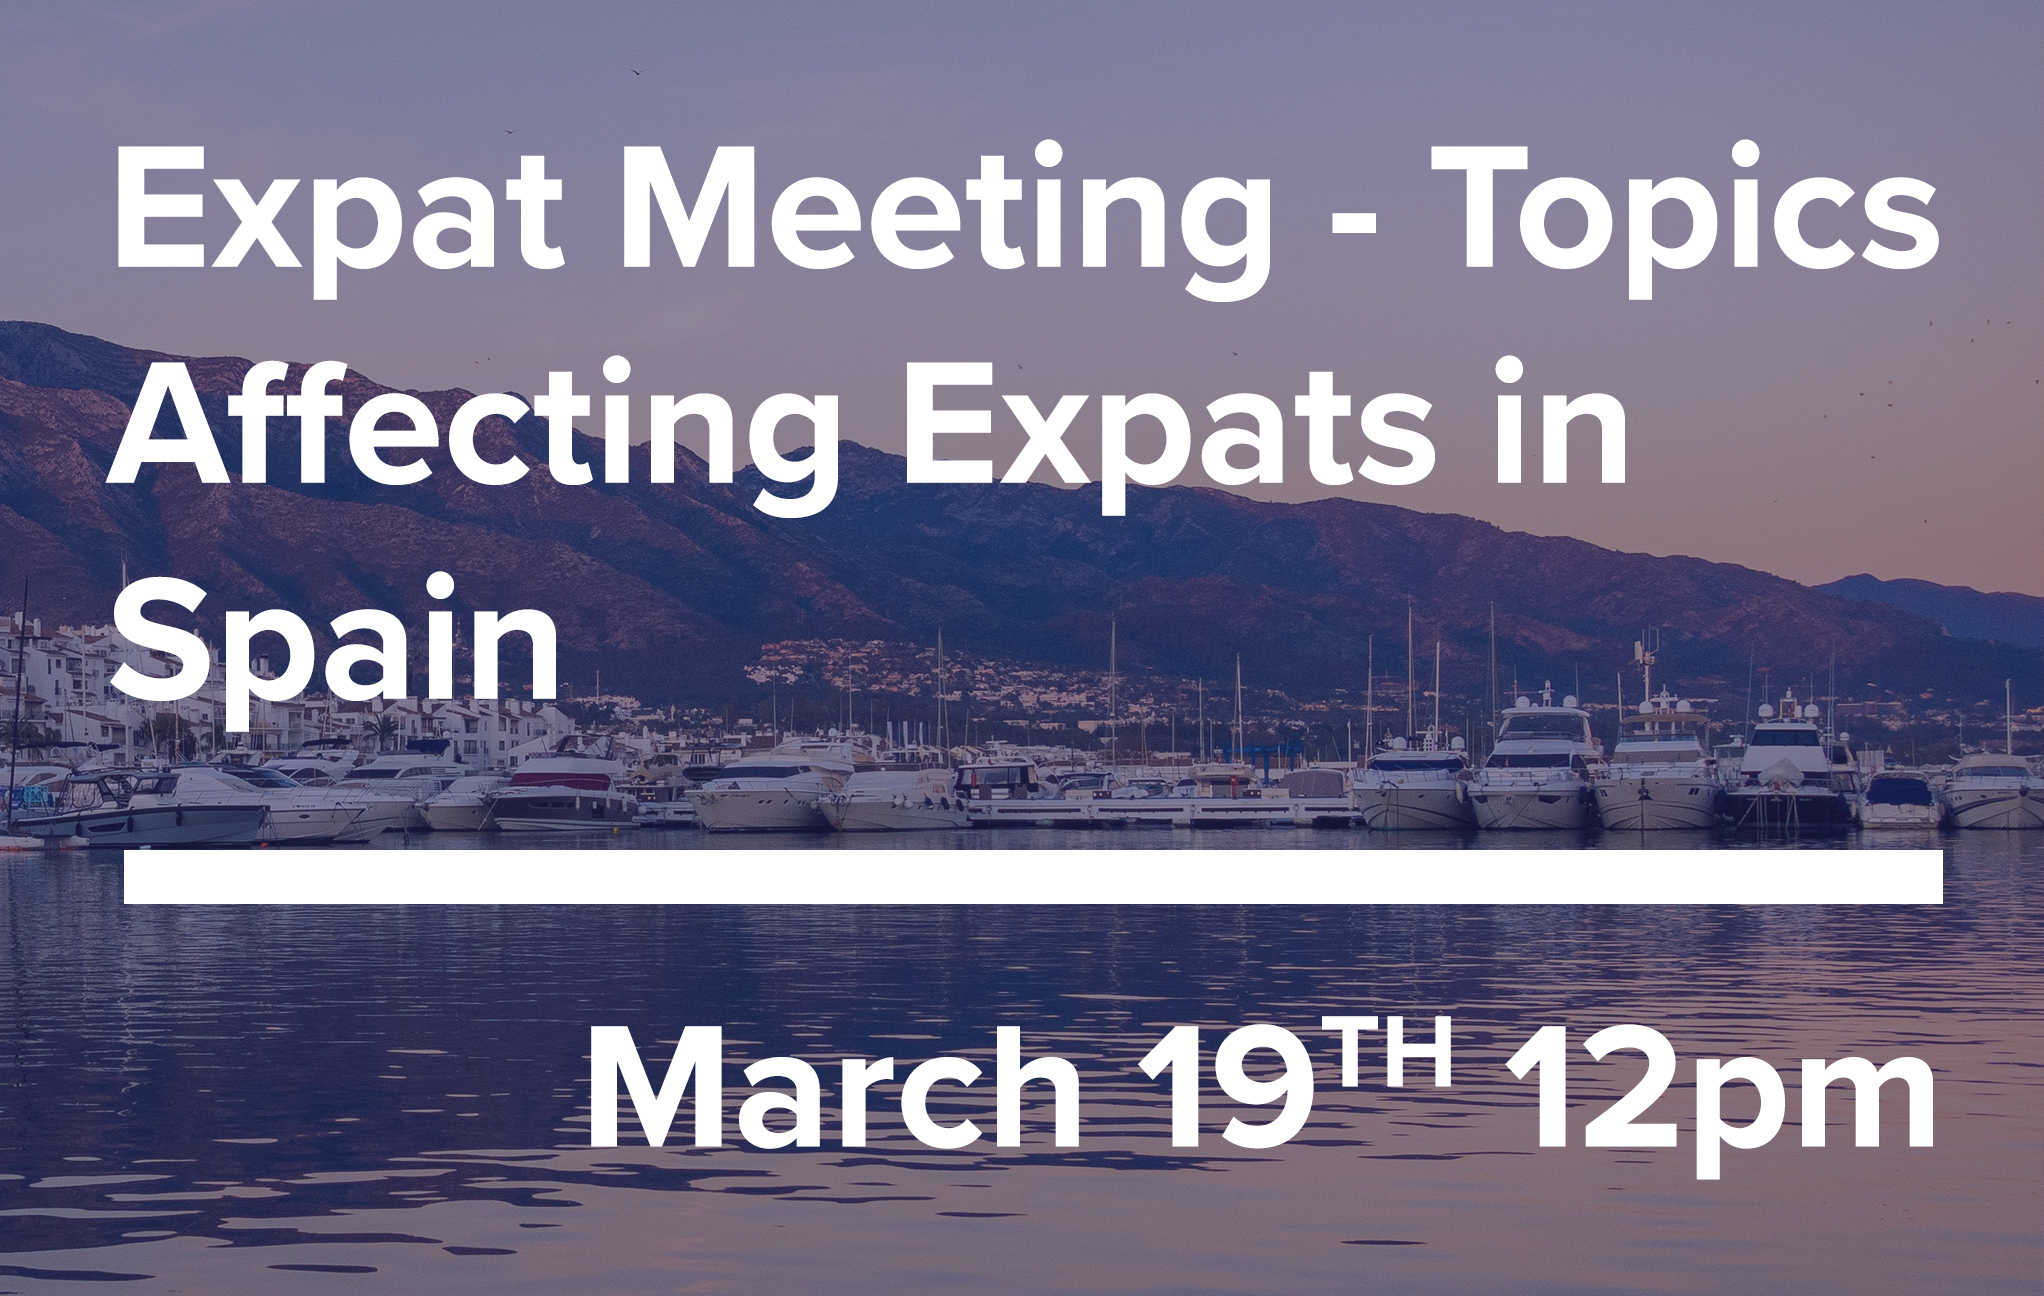 Expat Meeting – Topics affecting expats living in Spain